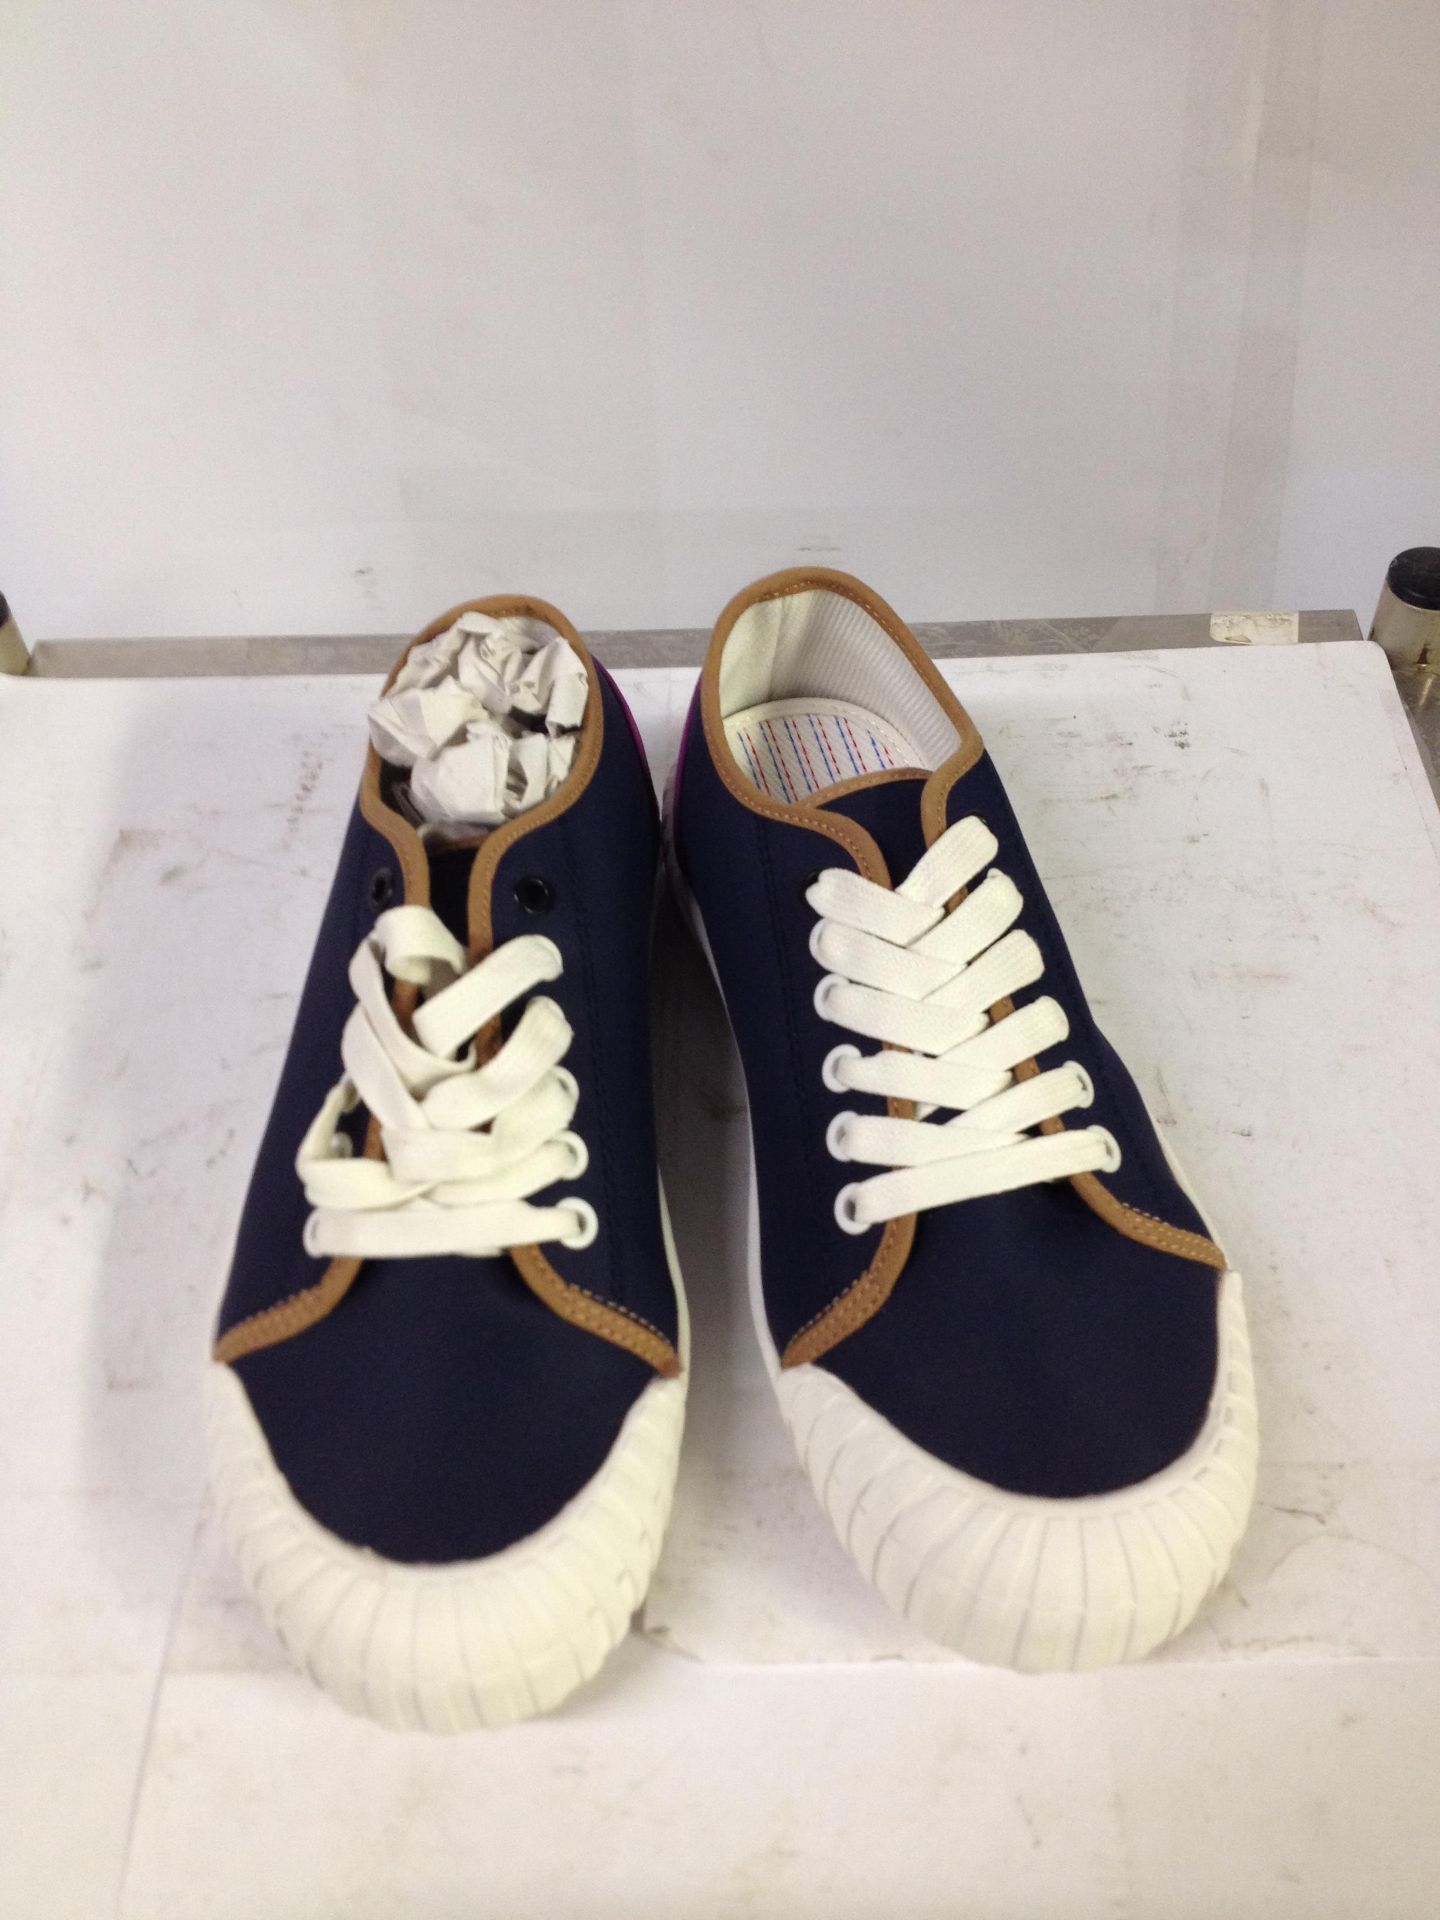 1 x Good News Trainers | Nylon/Canvas-Natural Rubber | Colour: Navy Purple | UK Size: 6 | RRP £ 50 - Image 2 of 2